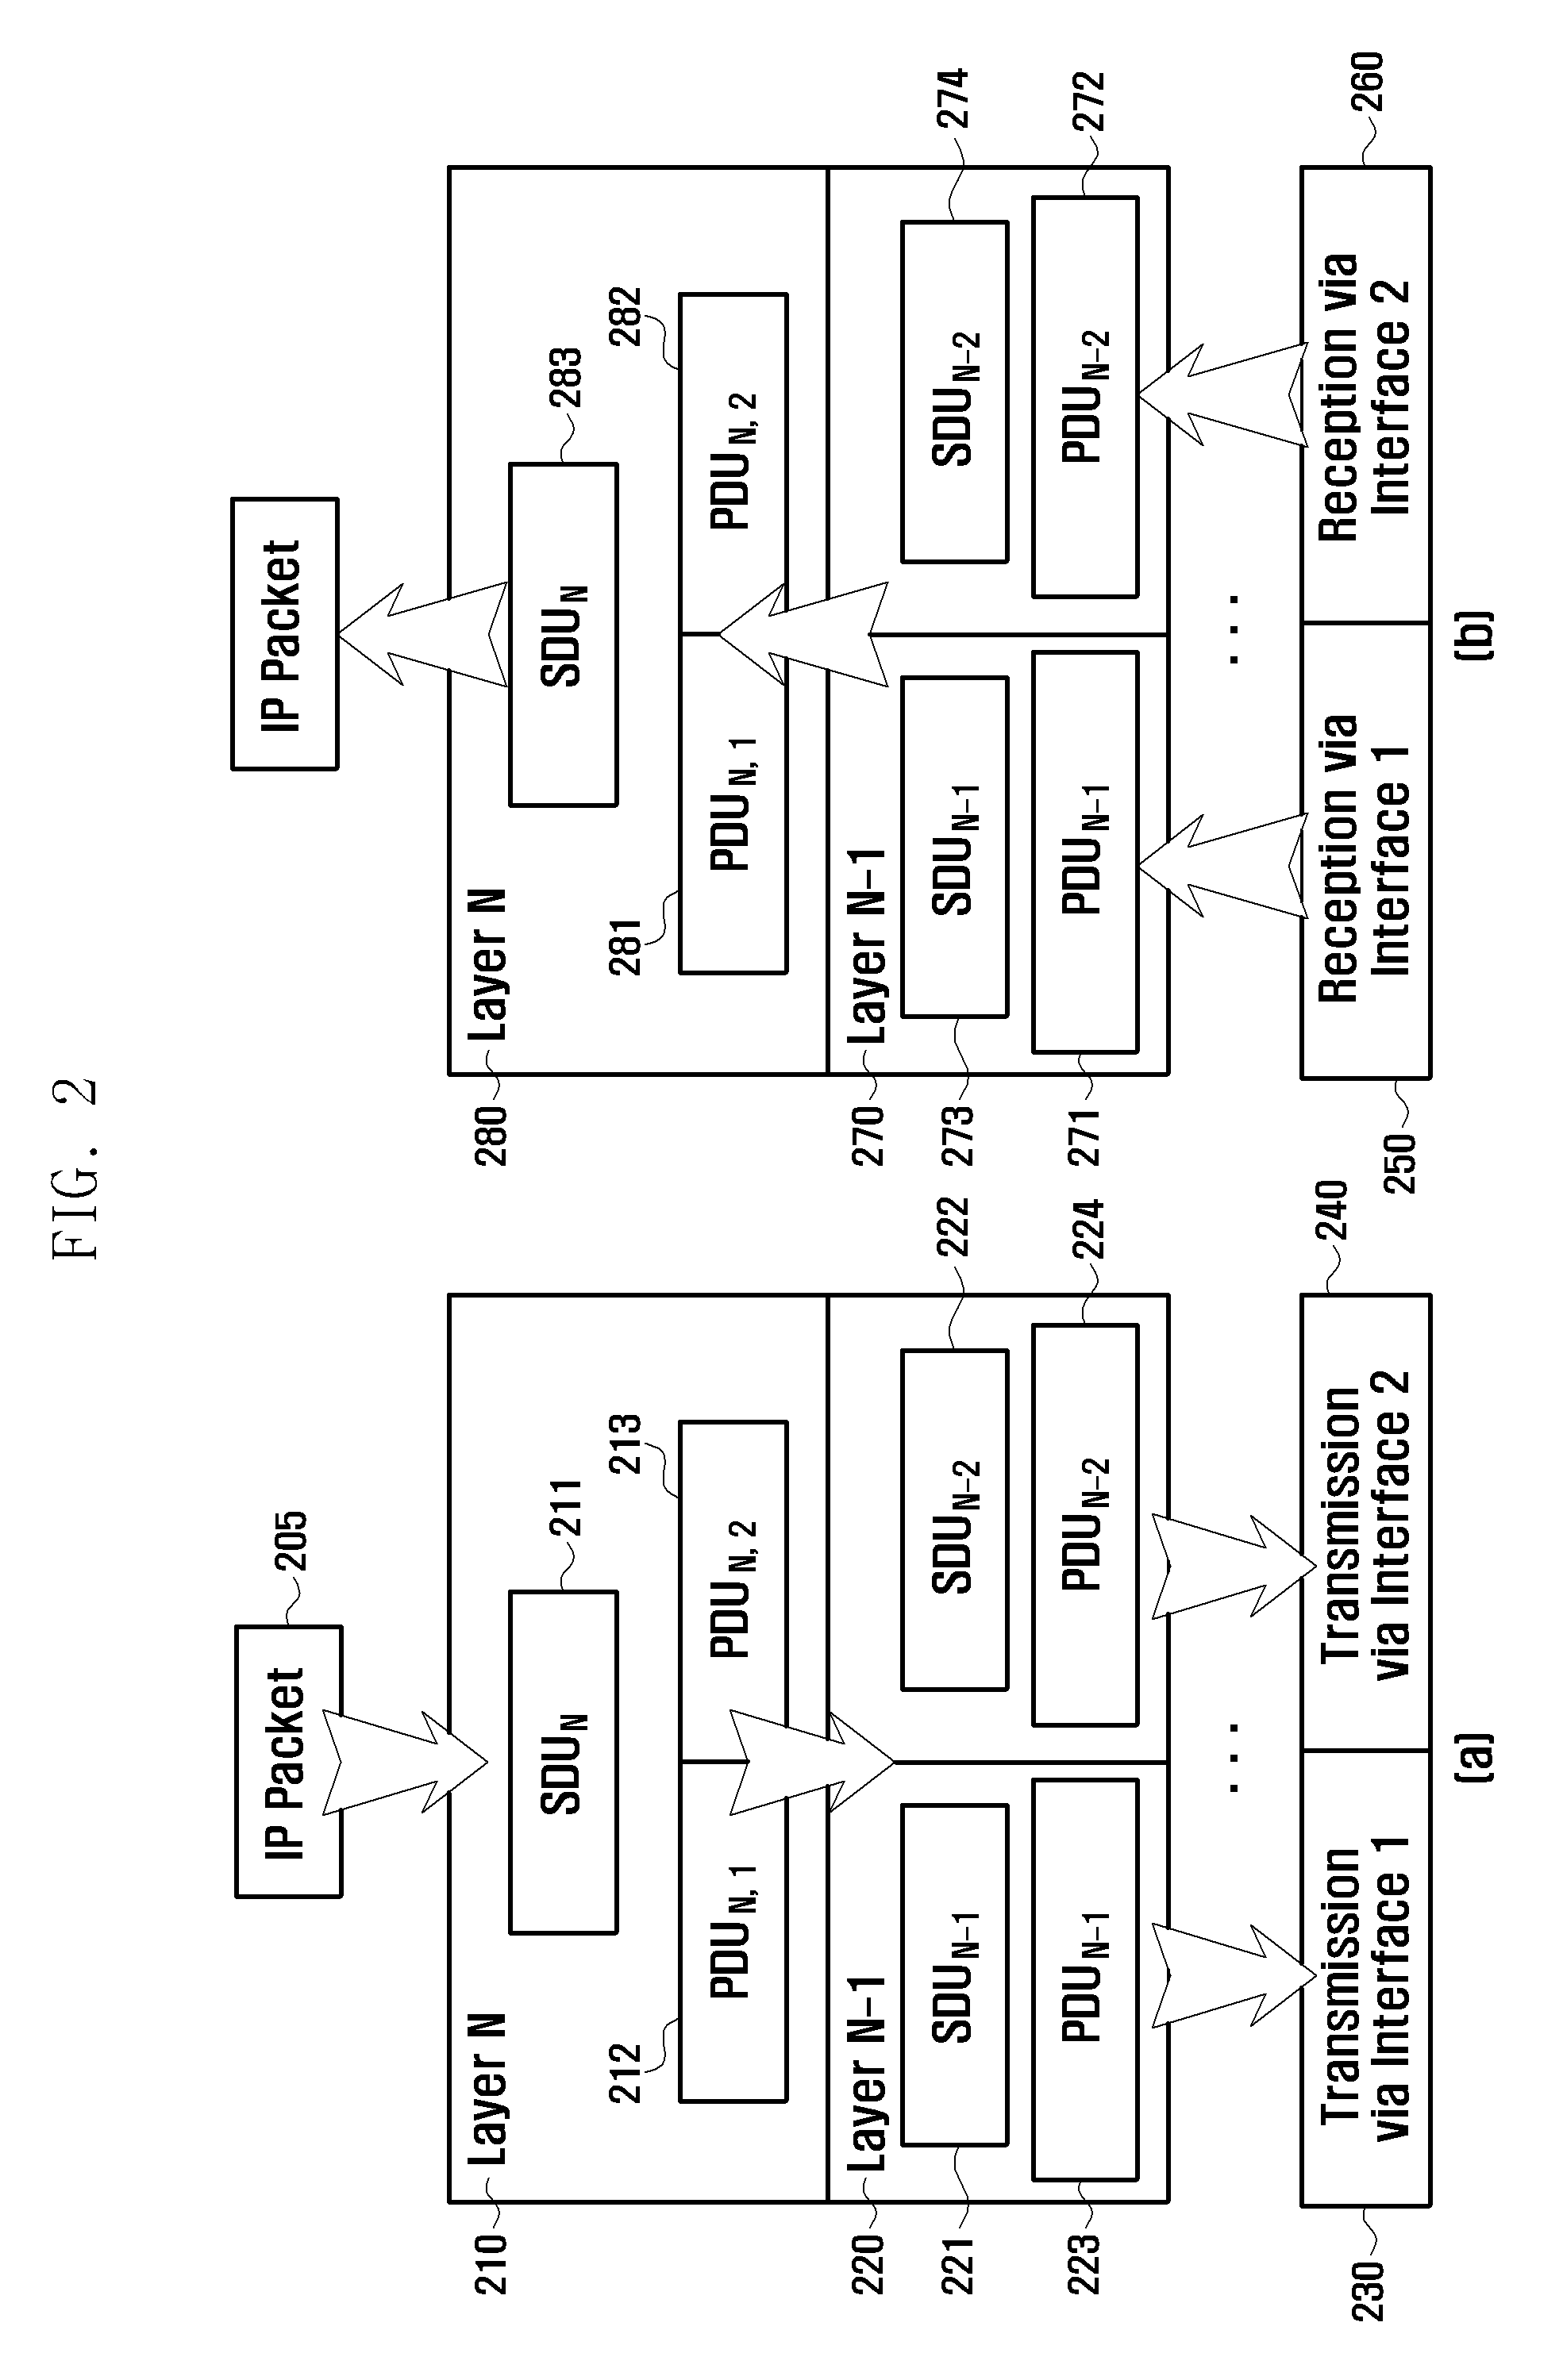 Method and apparatus for wireless communication on multiple spectrum bands